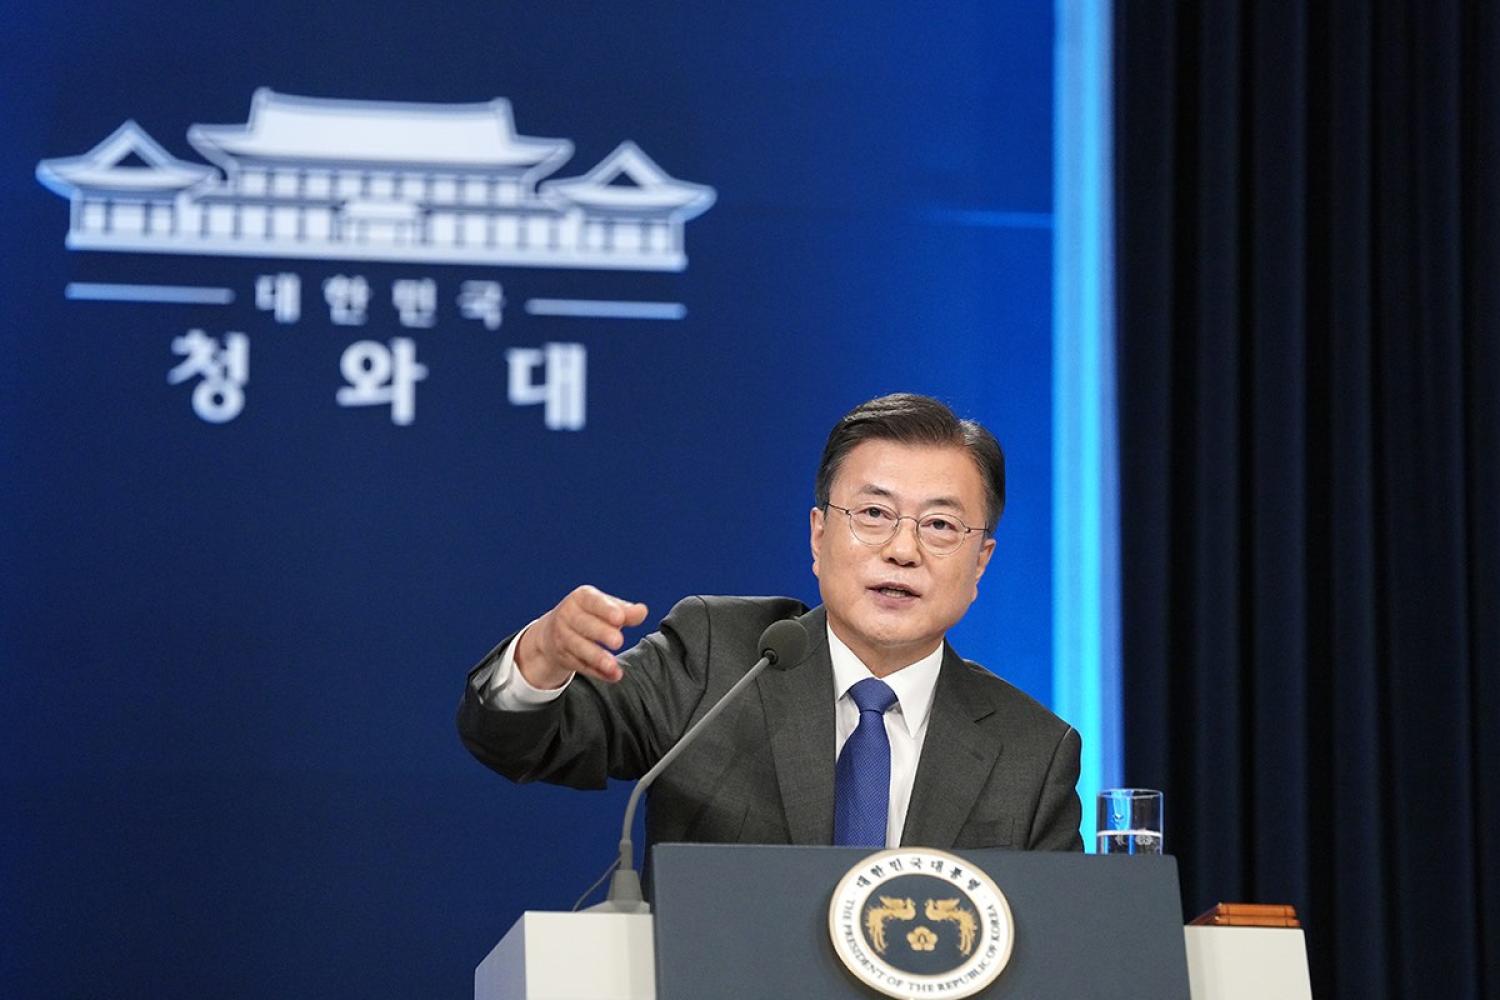 Moon Jae-in delivers a special address to mark the fourth anniversary of his inauguration at the presidential Blue House, Seoul, 10 May 2021 (Getty Images)